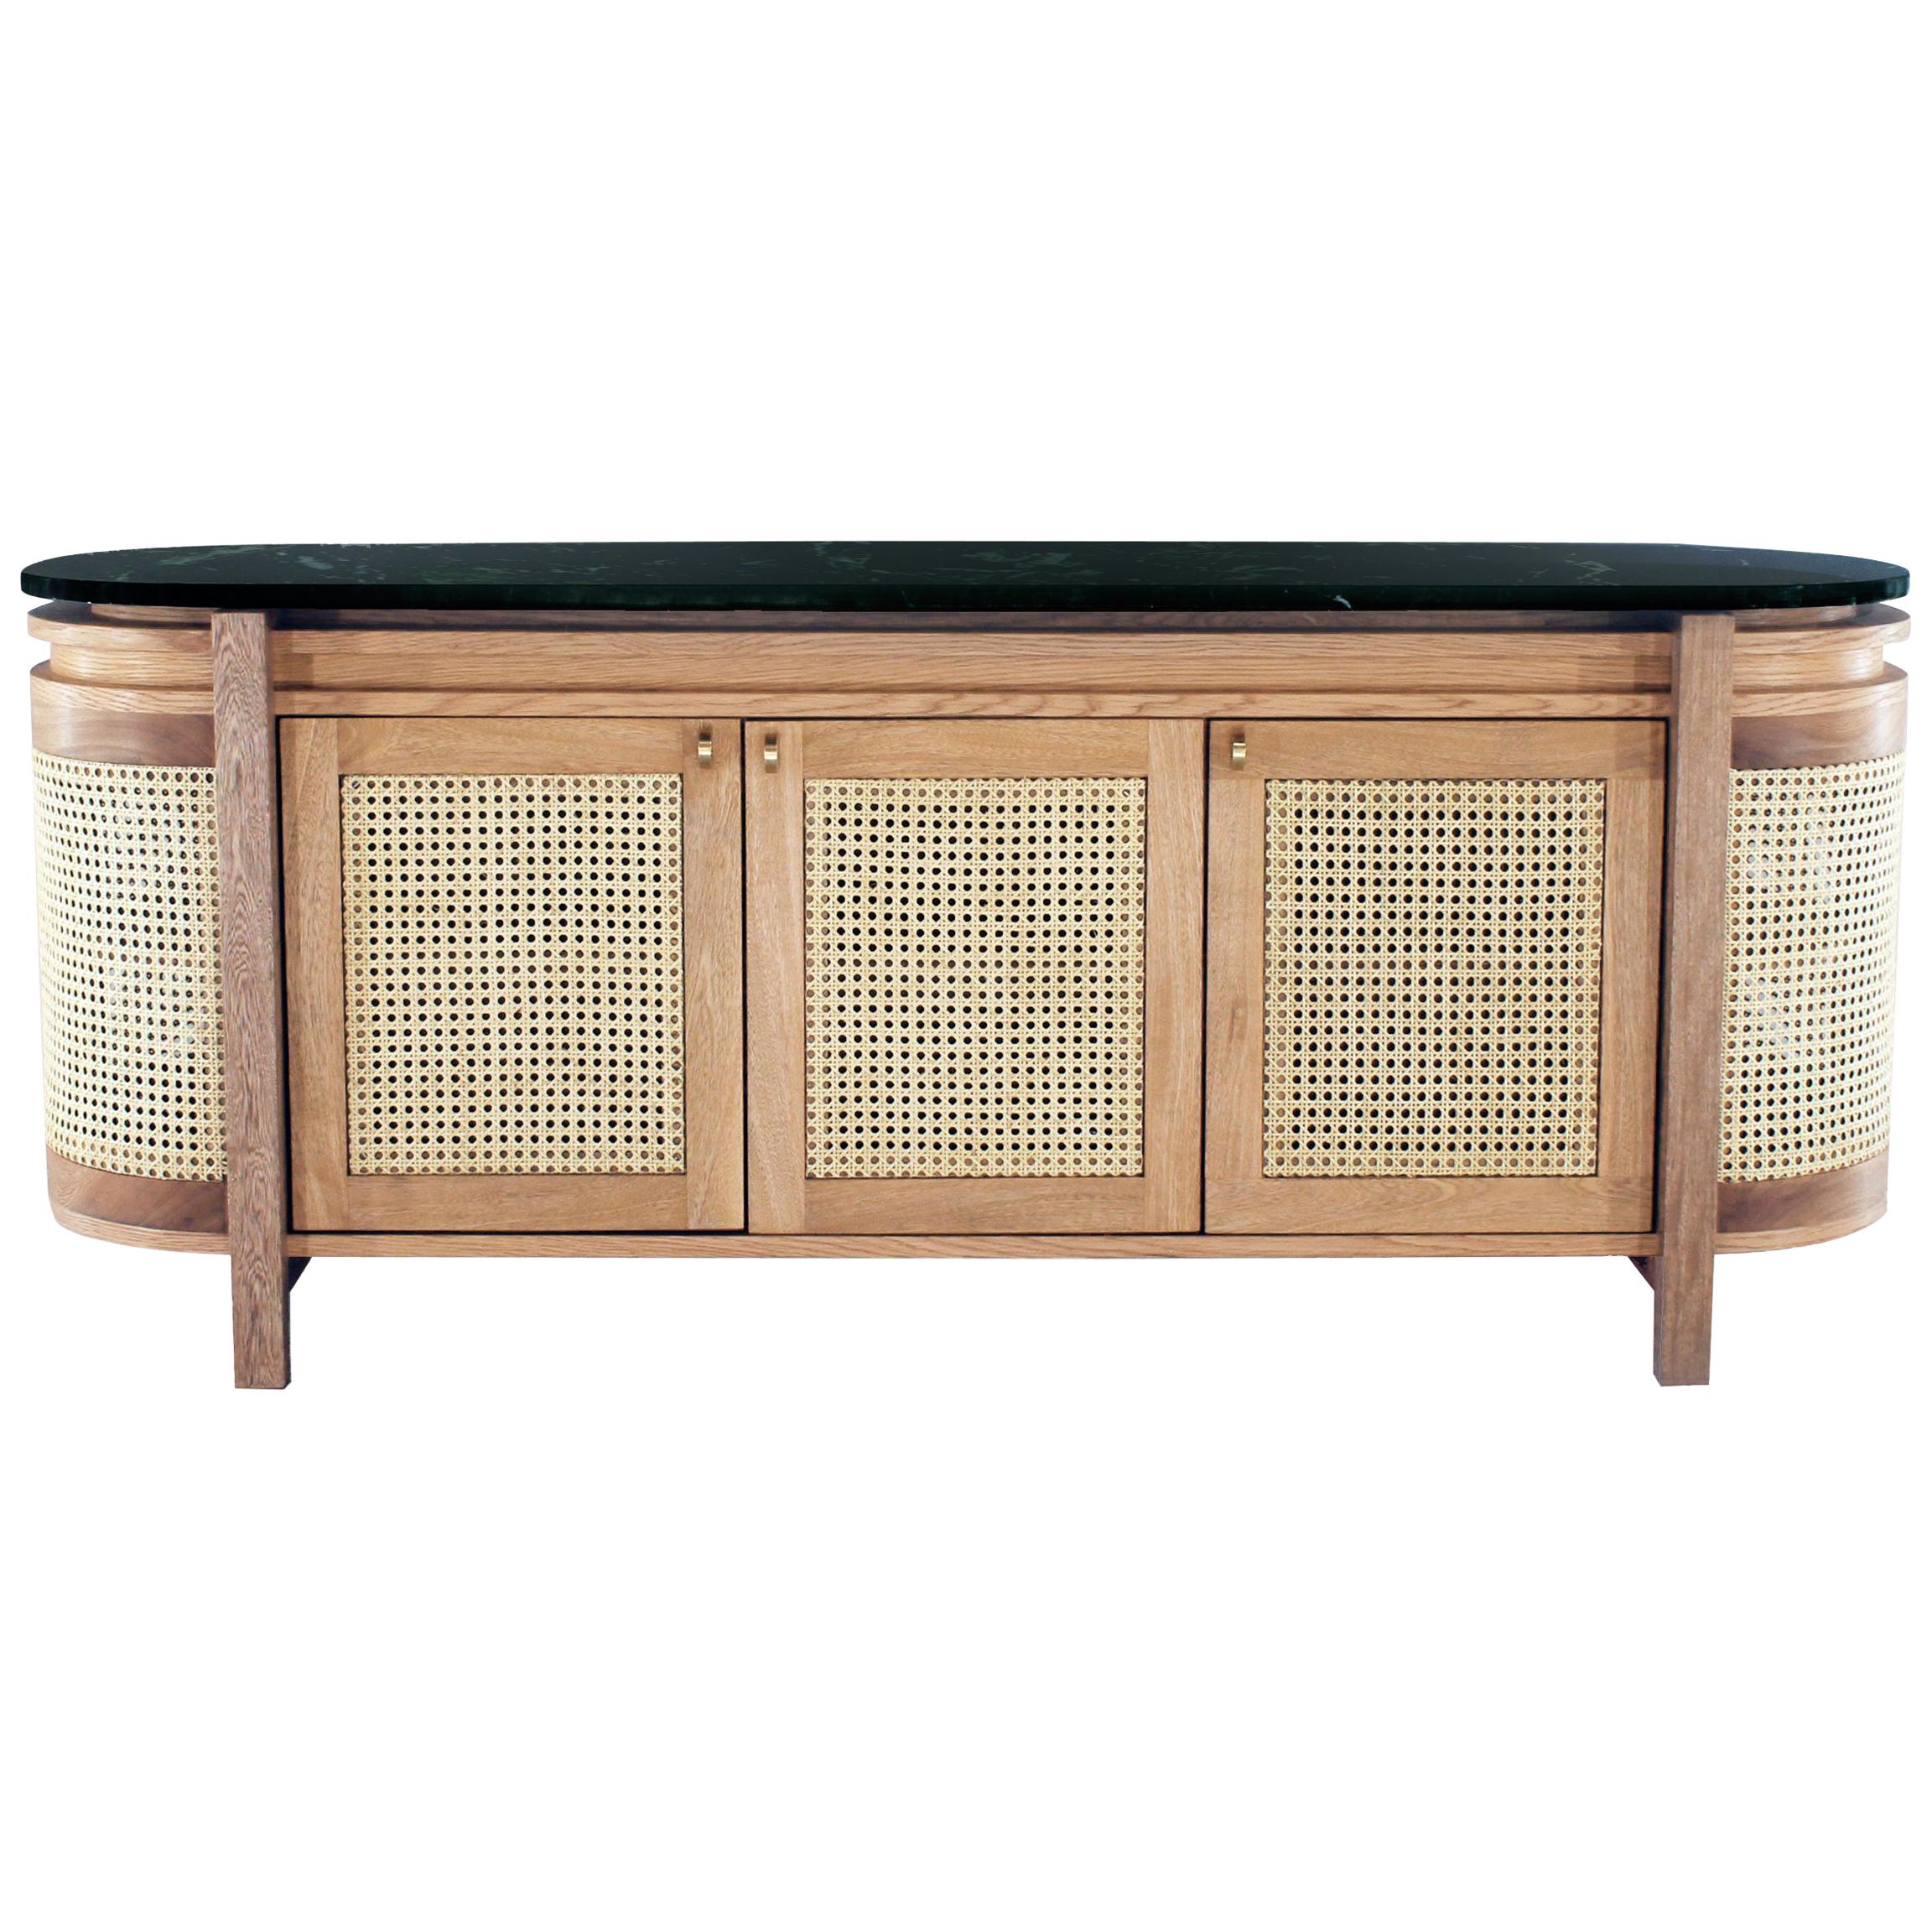 Mexico Sideboard, Wicker and Oak with Marble, Contemporary Mexican Design 160